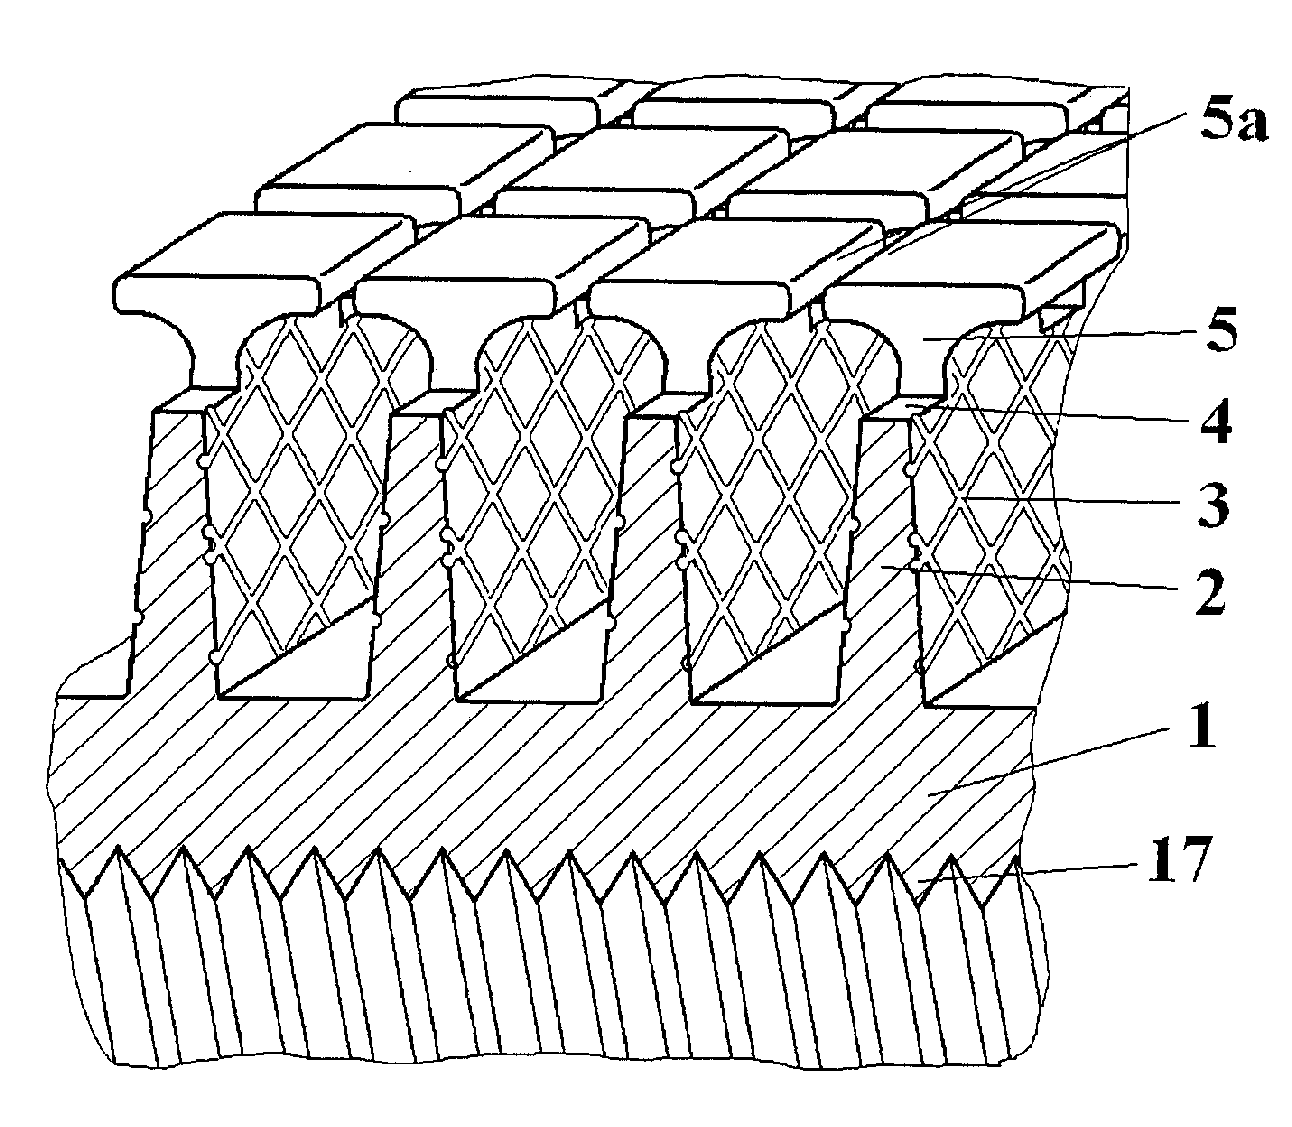 Enhanced Heat Transfer Tube and Manufacture Method Thereof